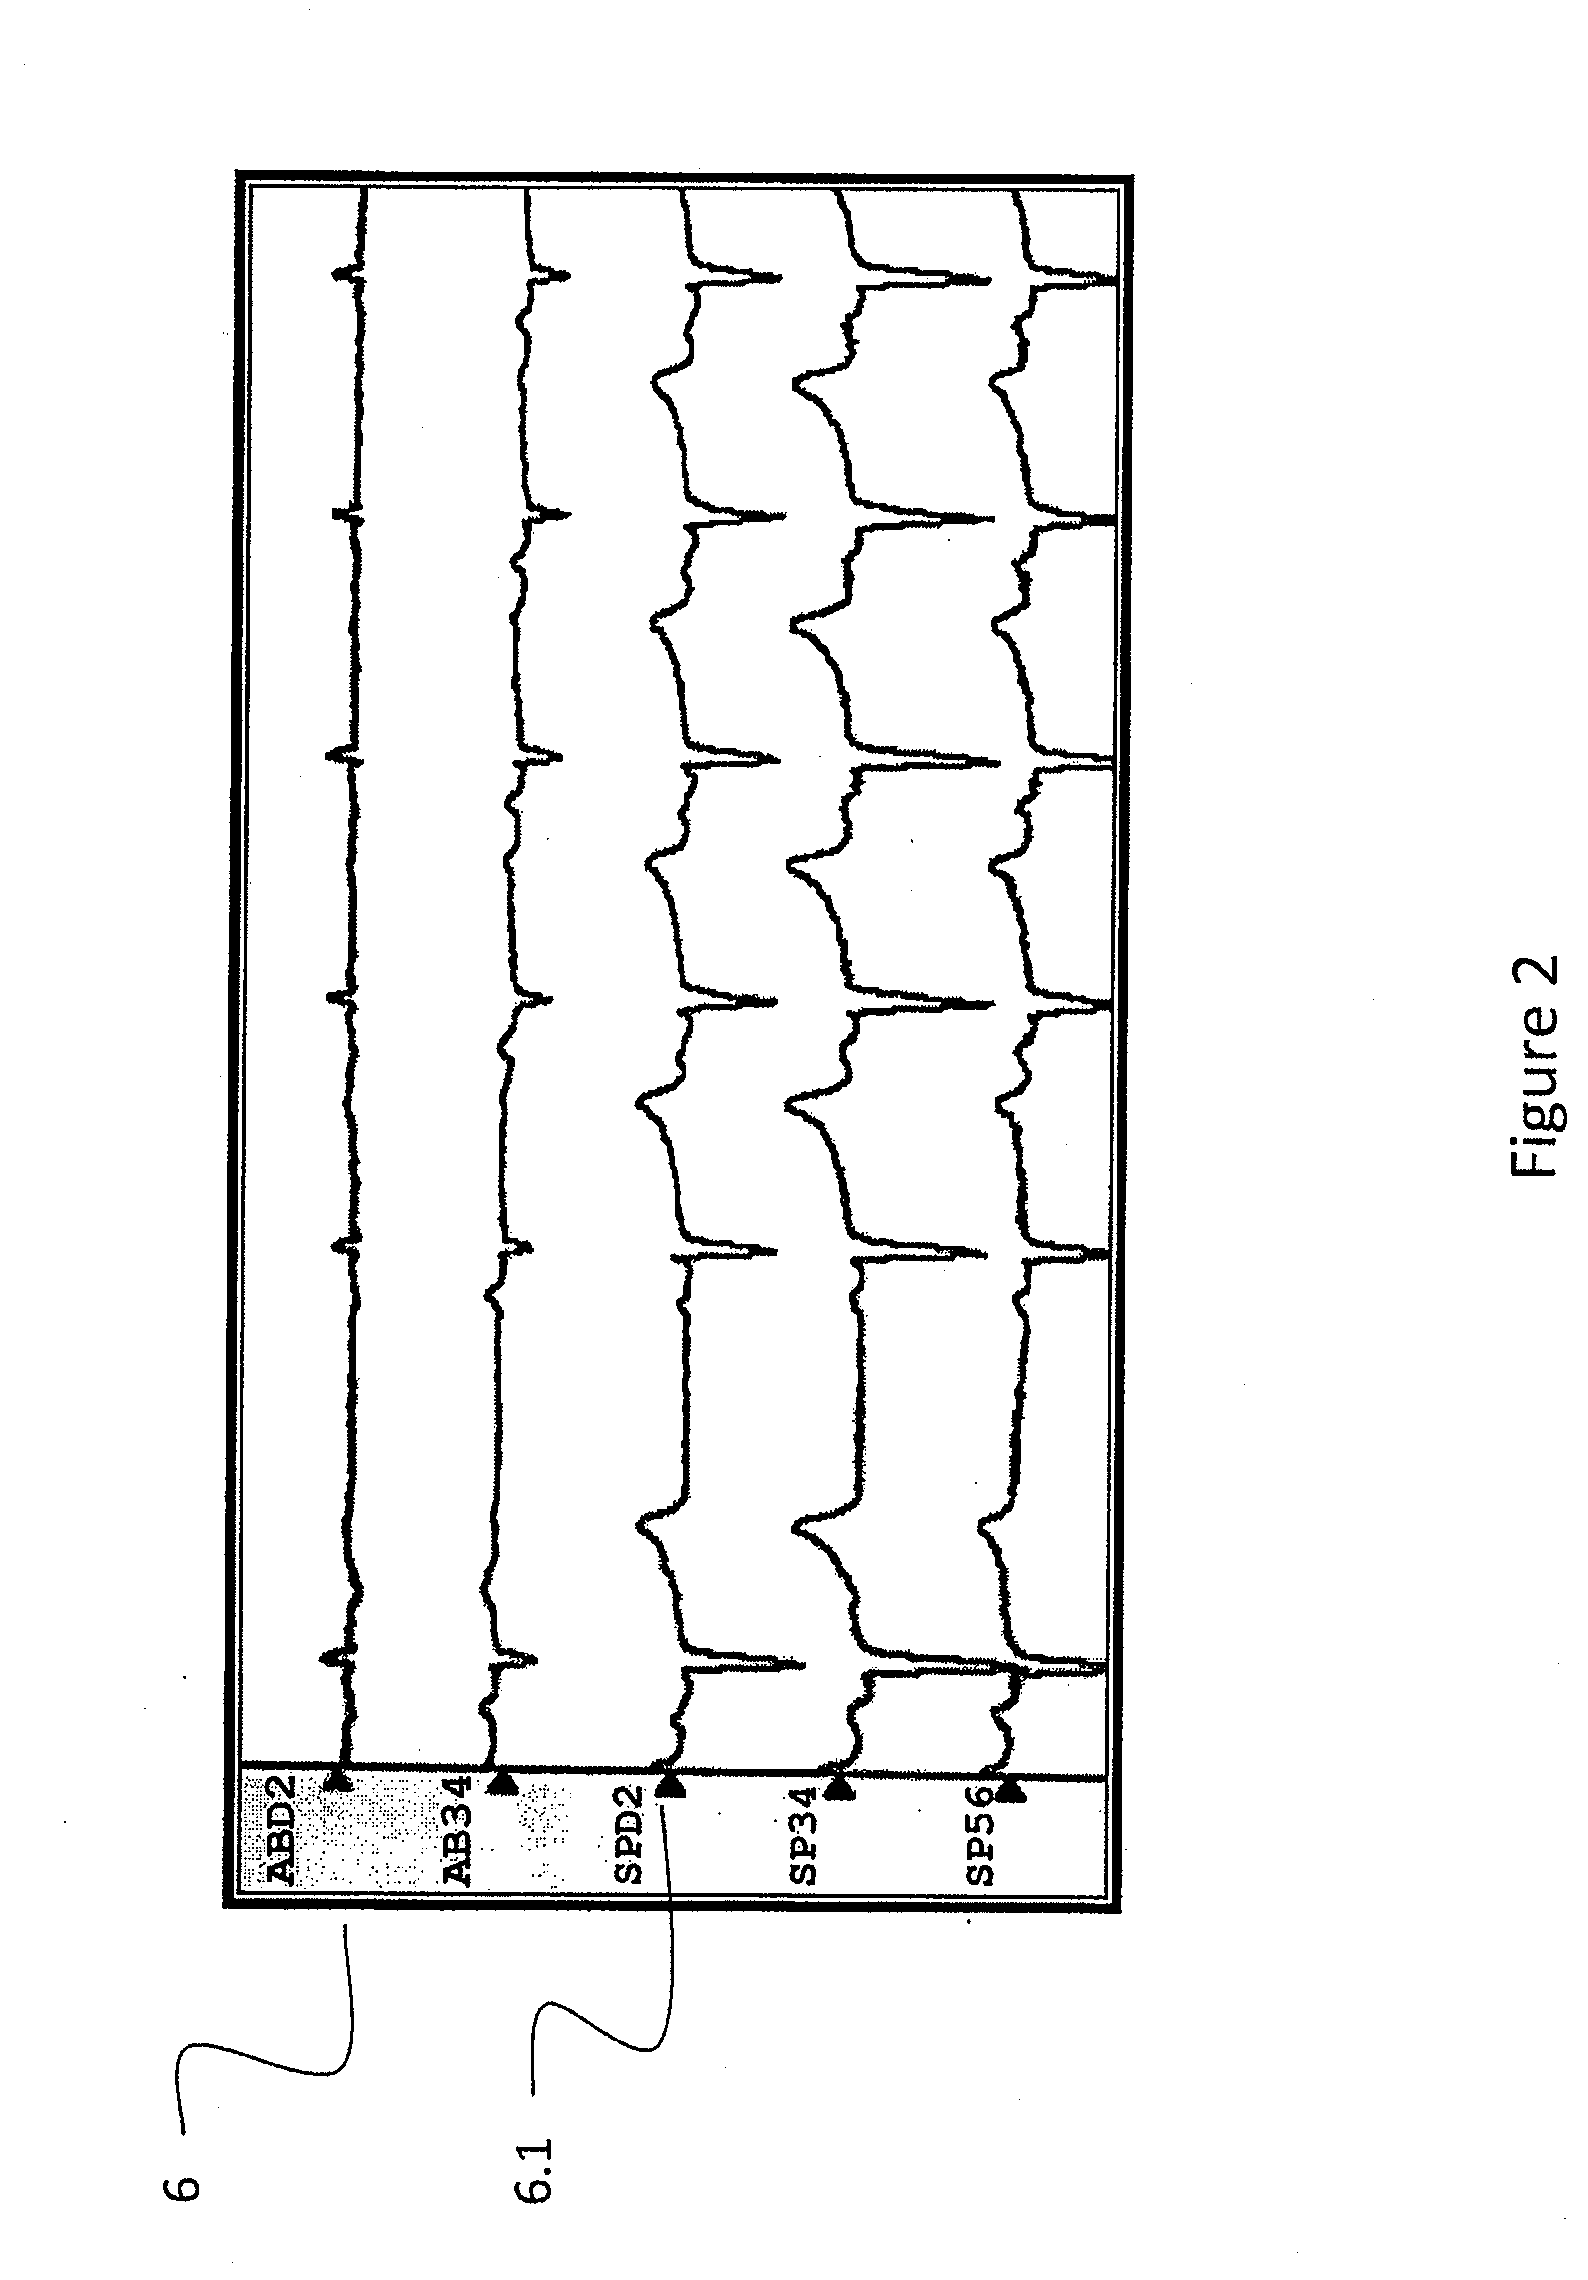 System and method for targeting catheter electrodes